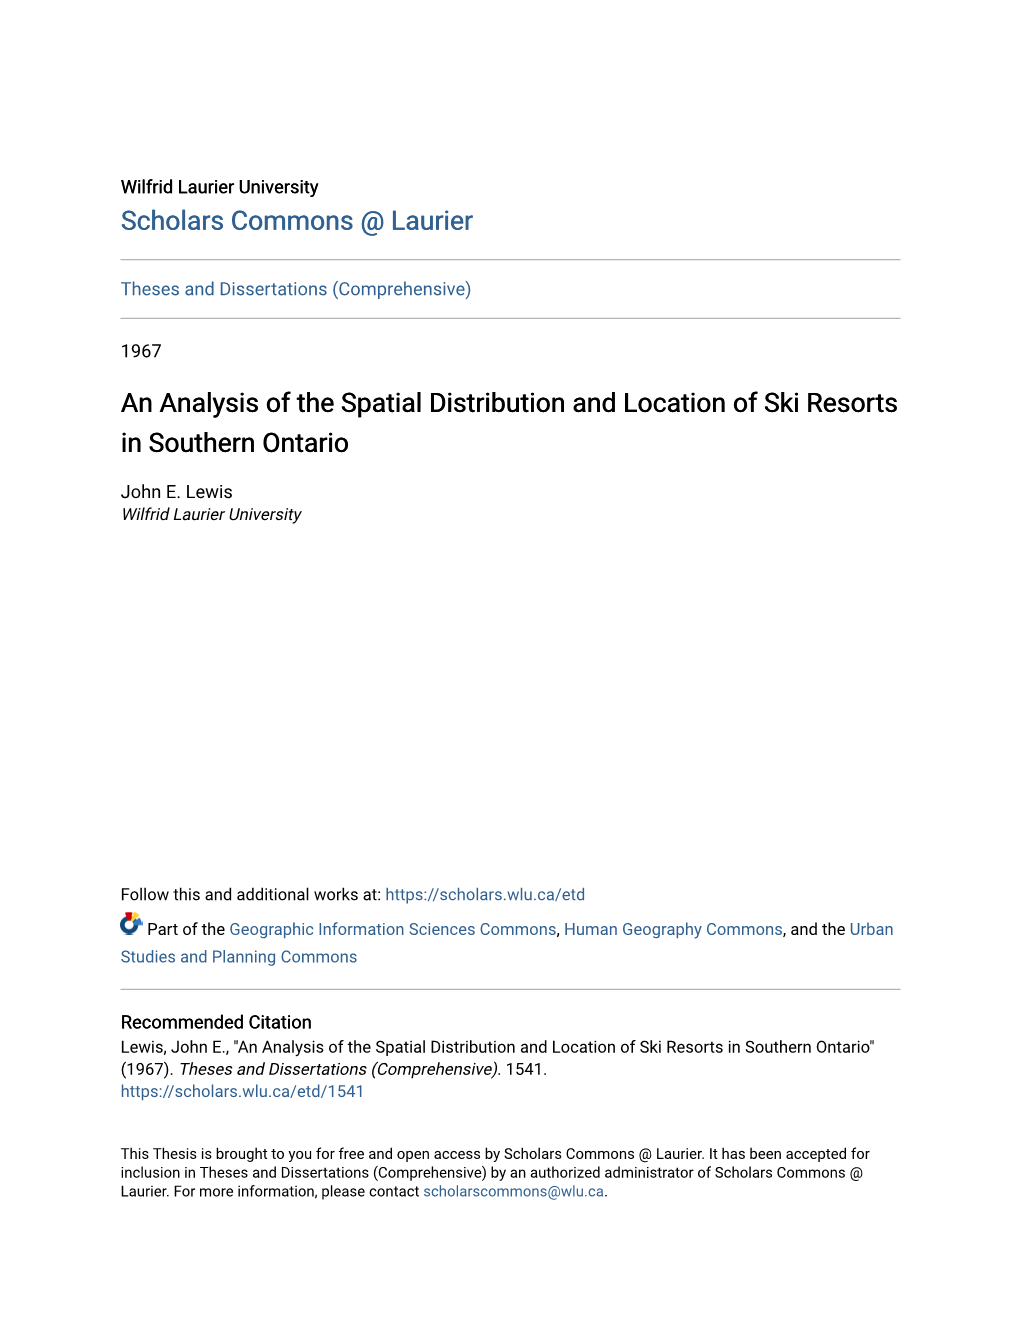 An Analysis of the Spatial Distribution and Location of Ski Resorts in Southern Ontario